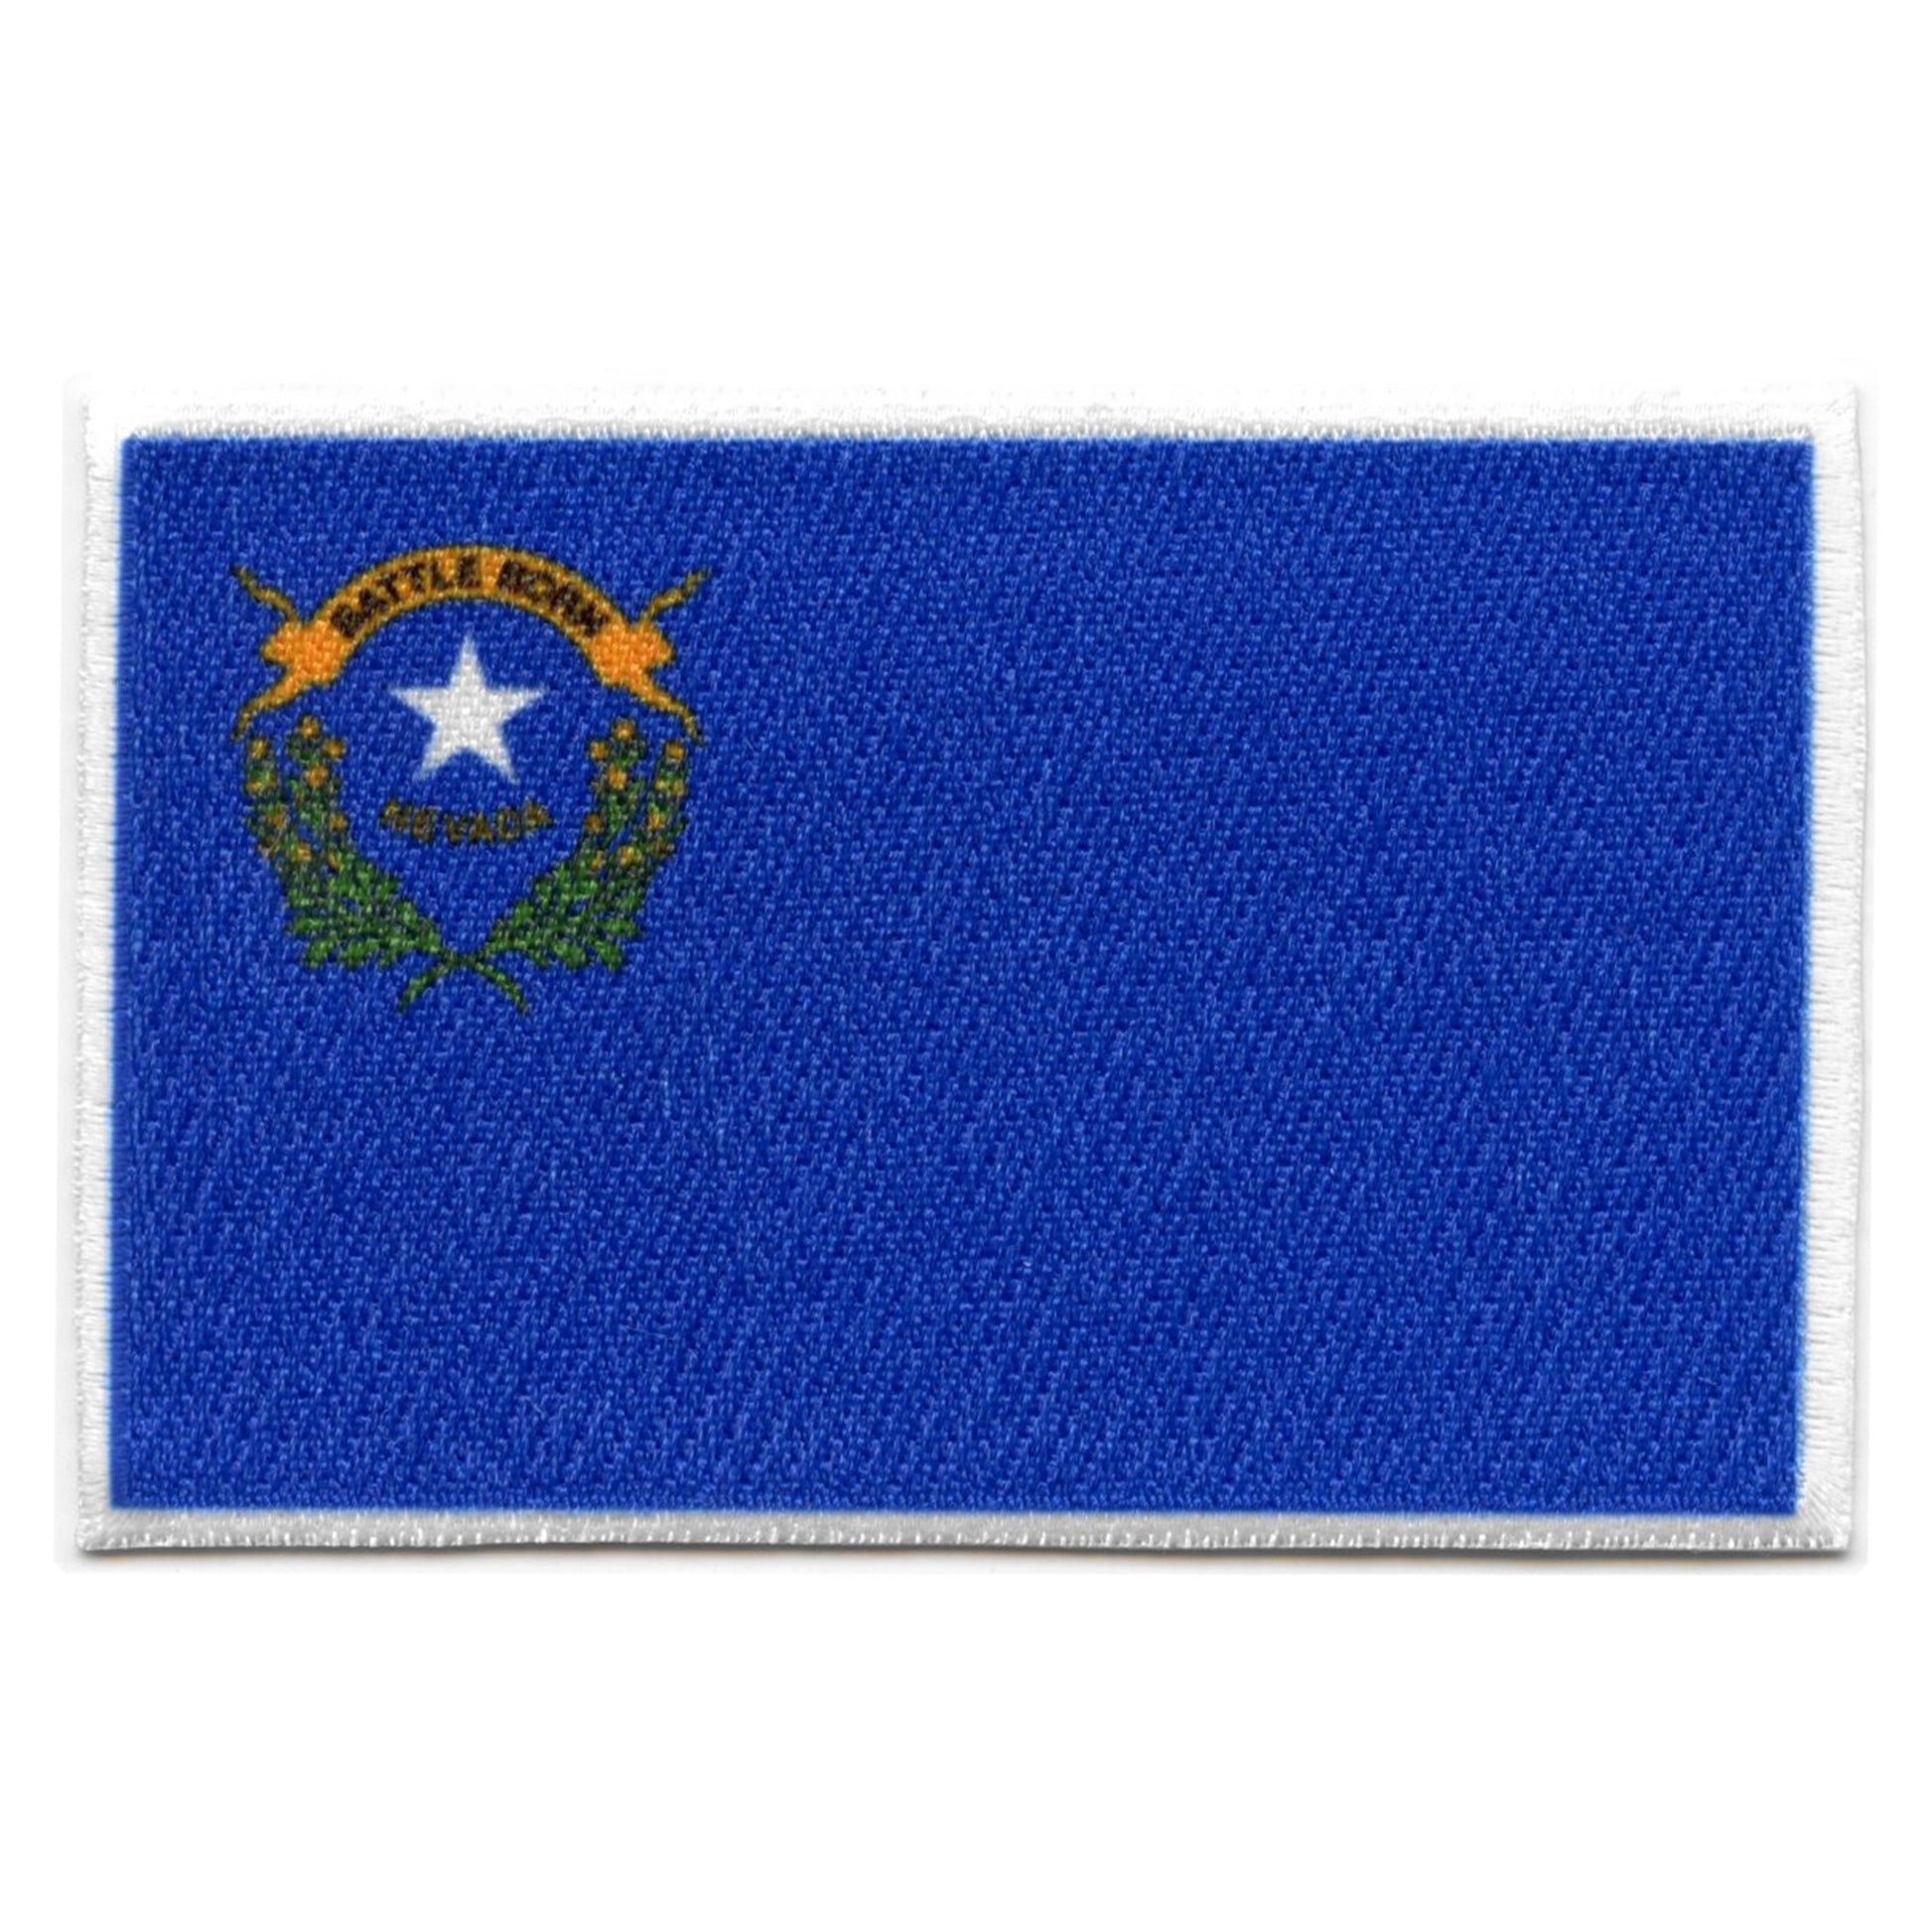 Nevada Patch State Flag Embroidered Iron On 